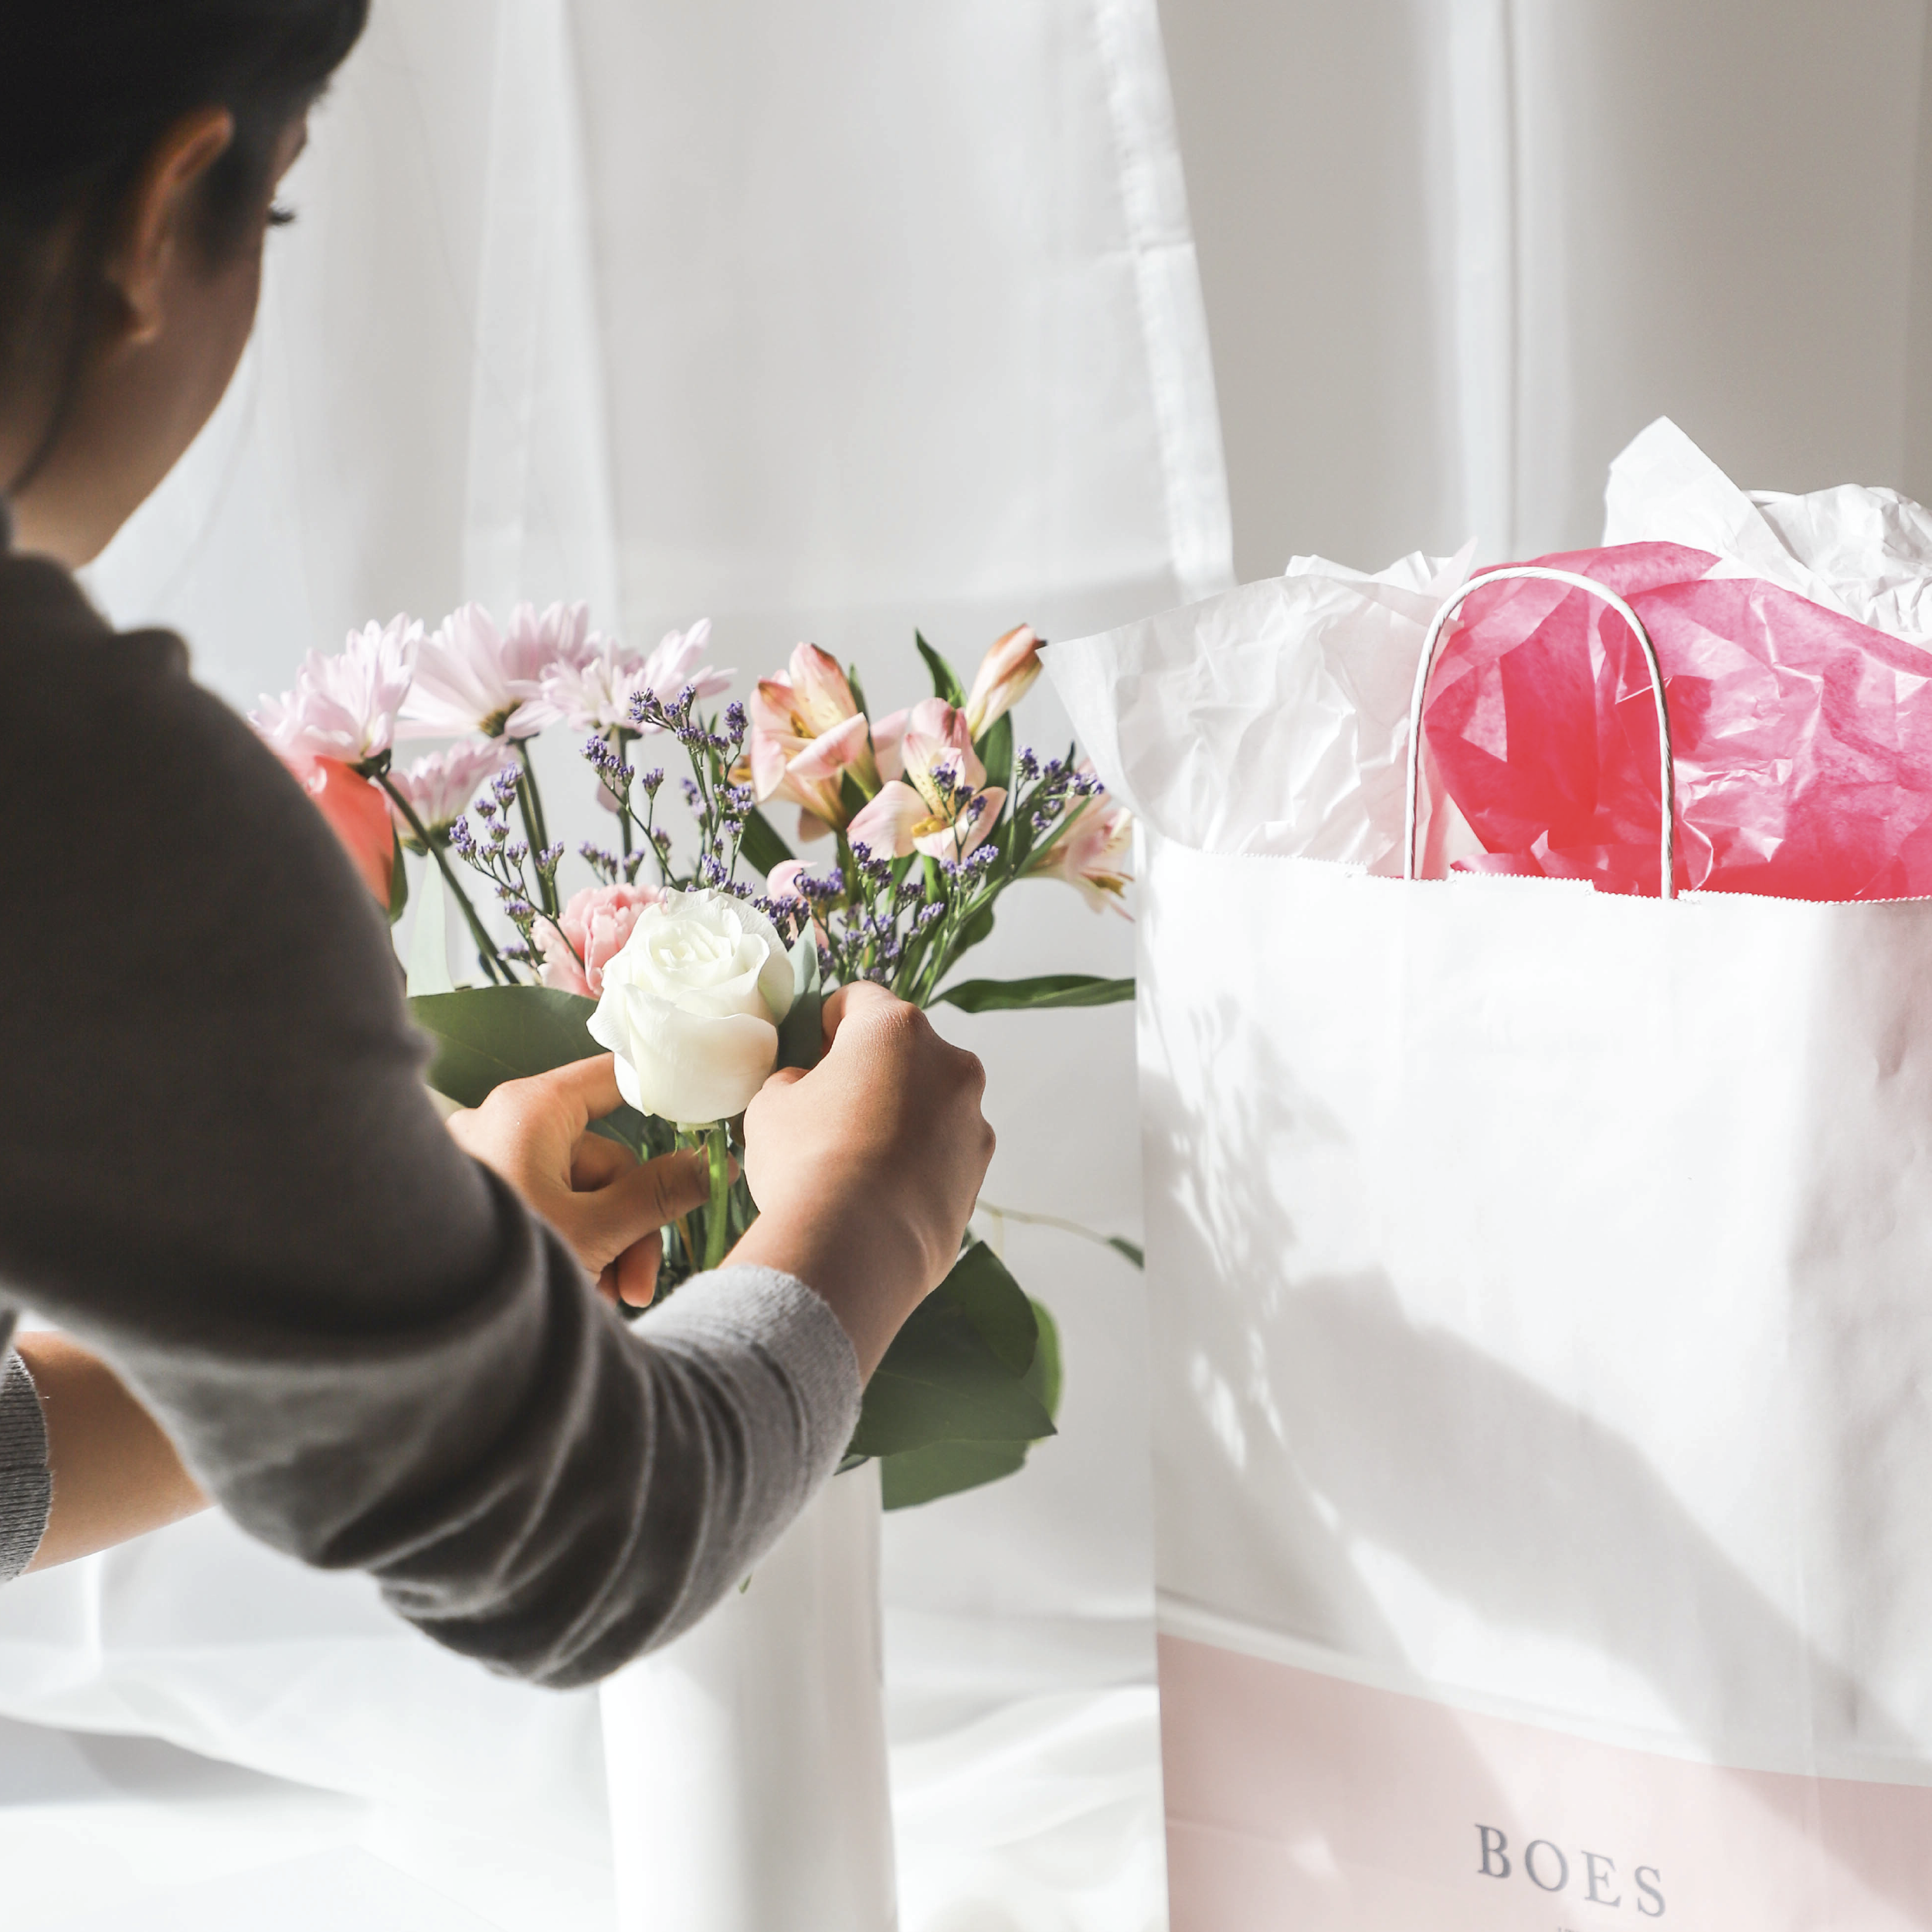 How to Plan the Perfect Mother’s Day